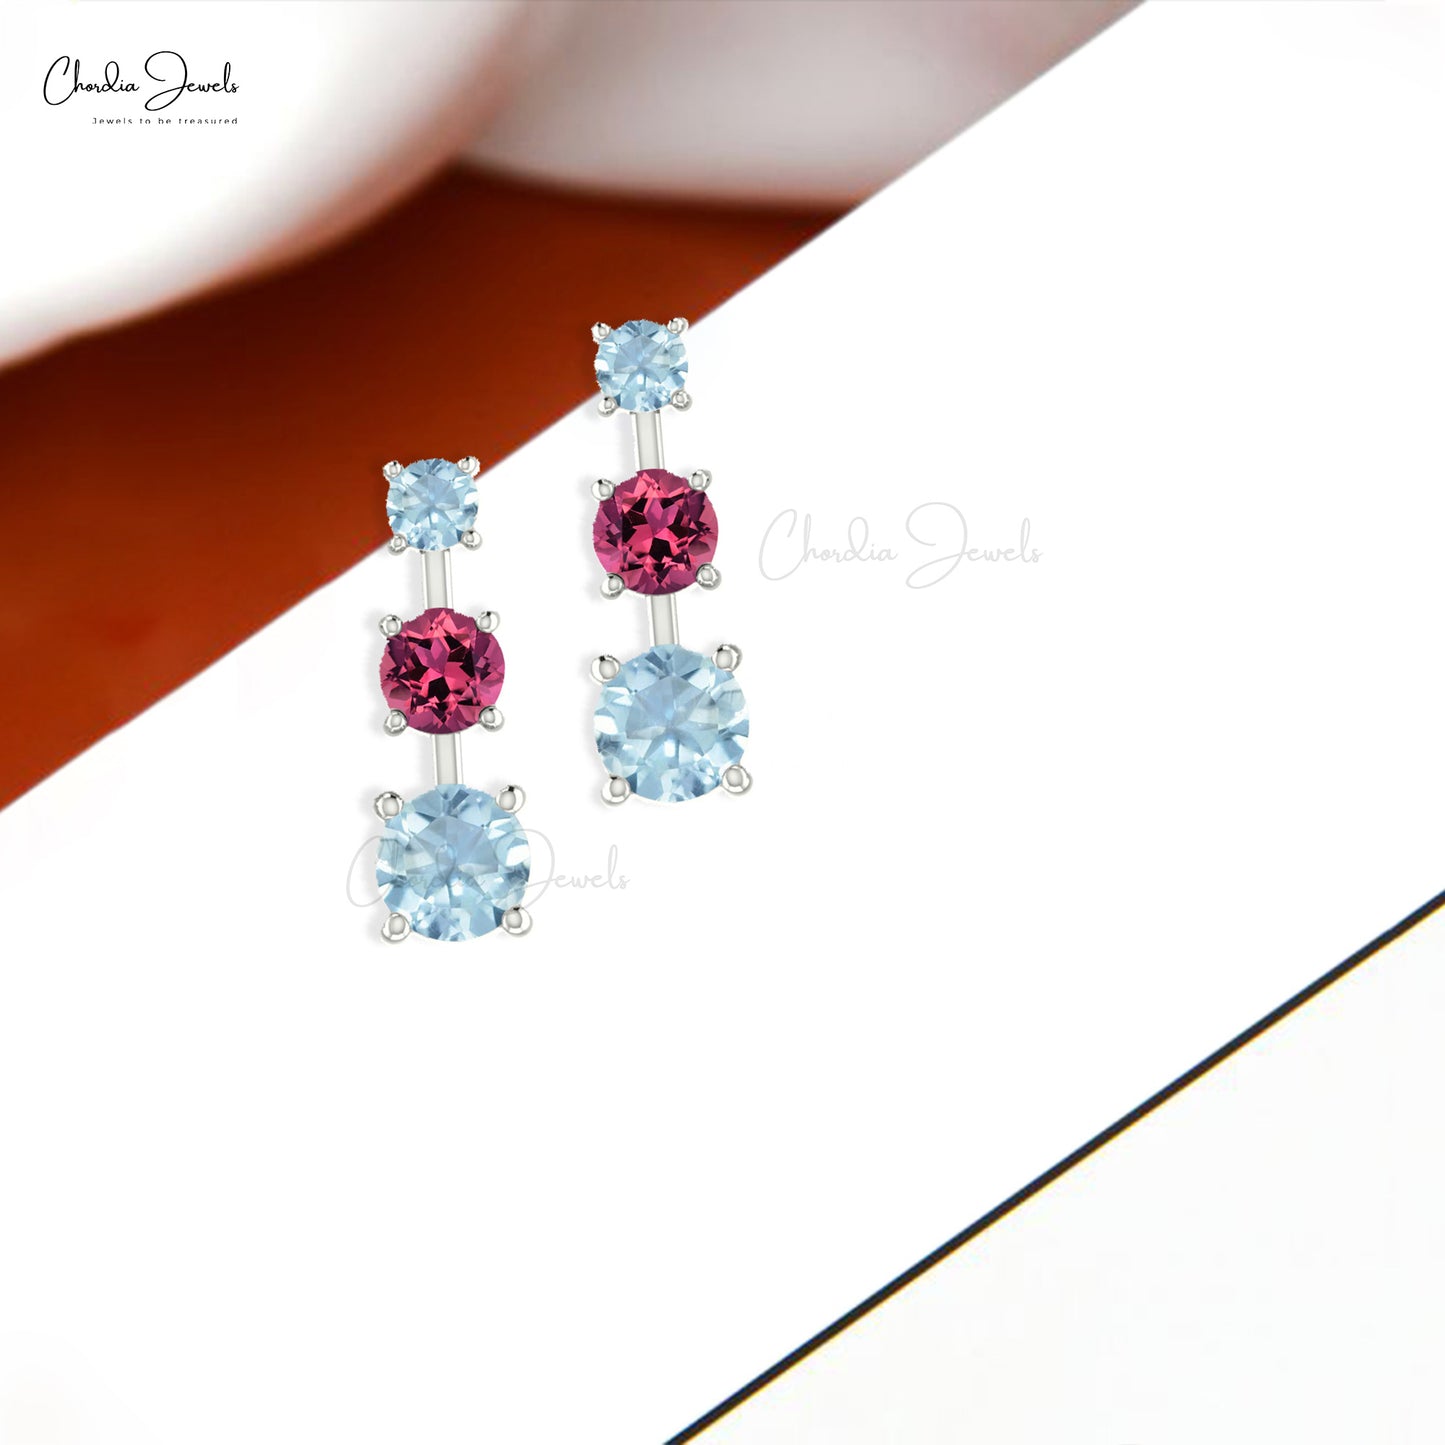 Genuine Pink Tourmaline Prong Set Earrings 4mm Round Cut Gemstone Earrings 14k Solid Gold Studs For Her